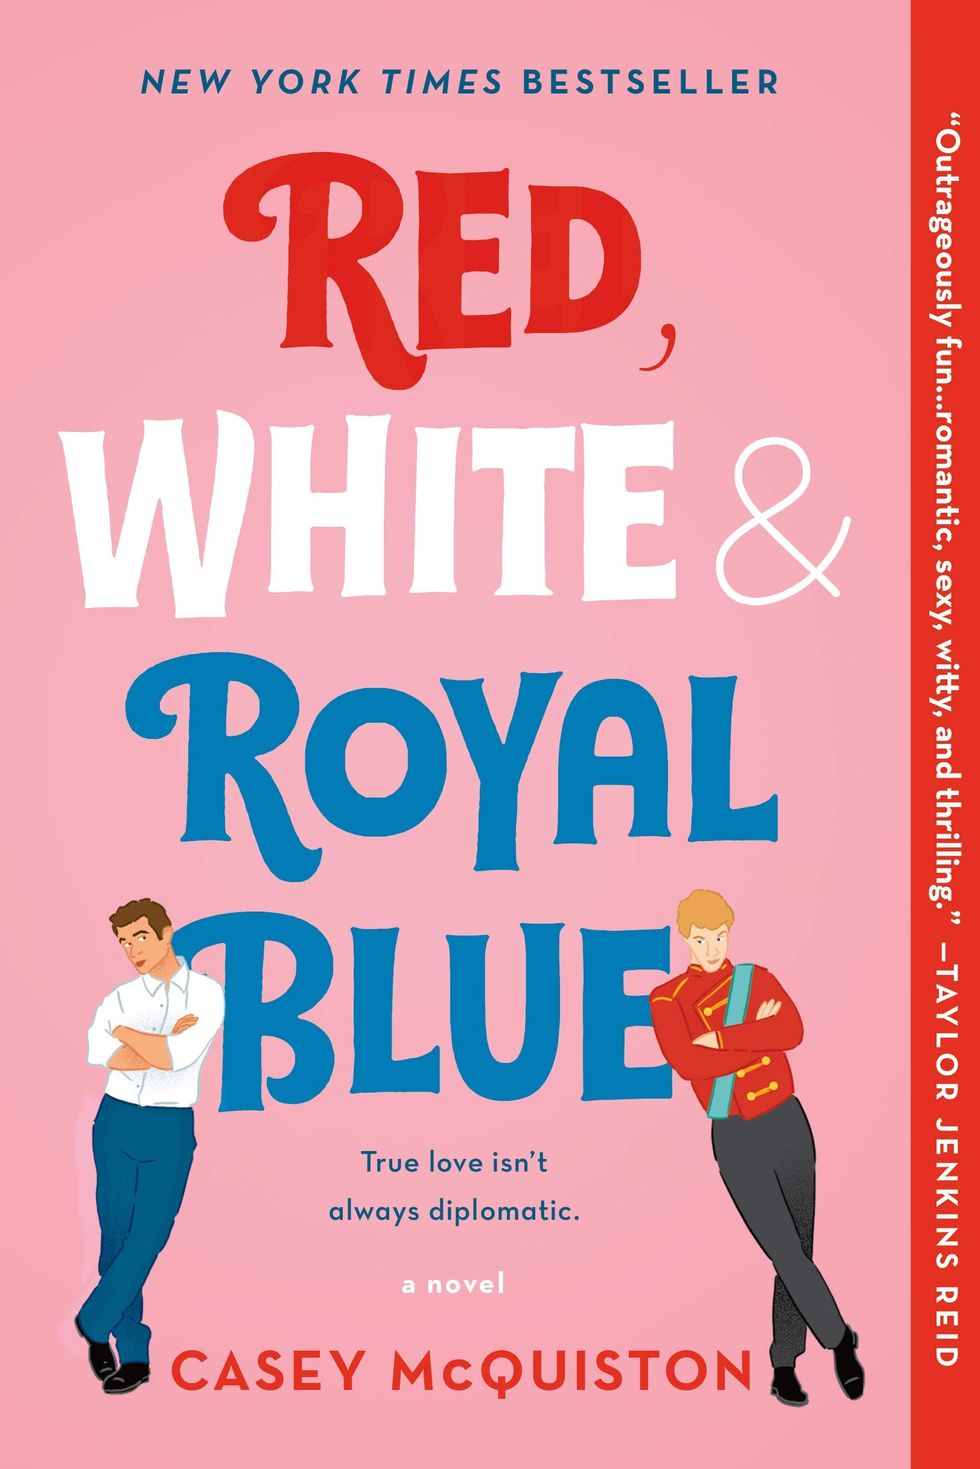 Red, White & Royal Blue by Casey McQuiston (2019)